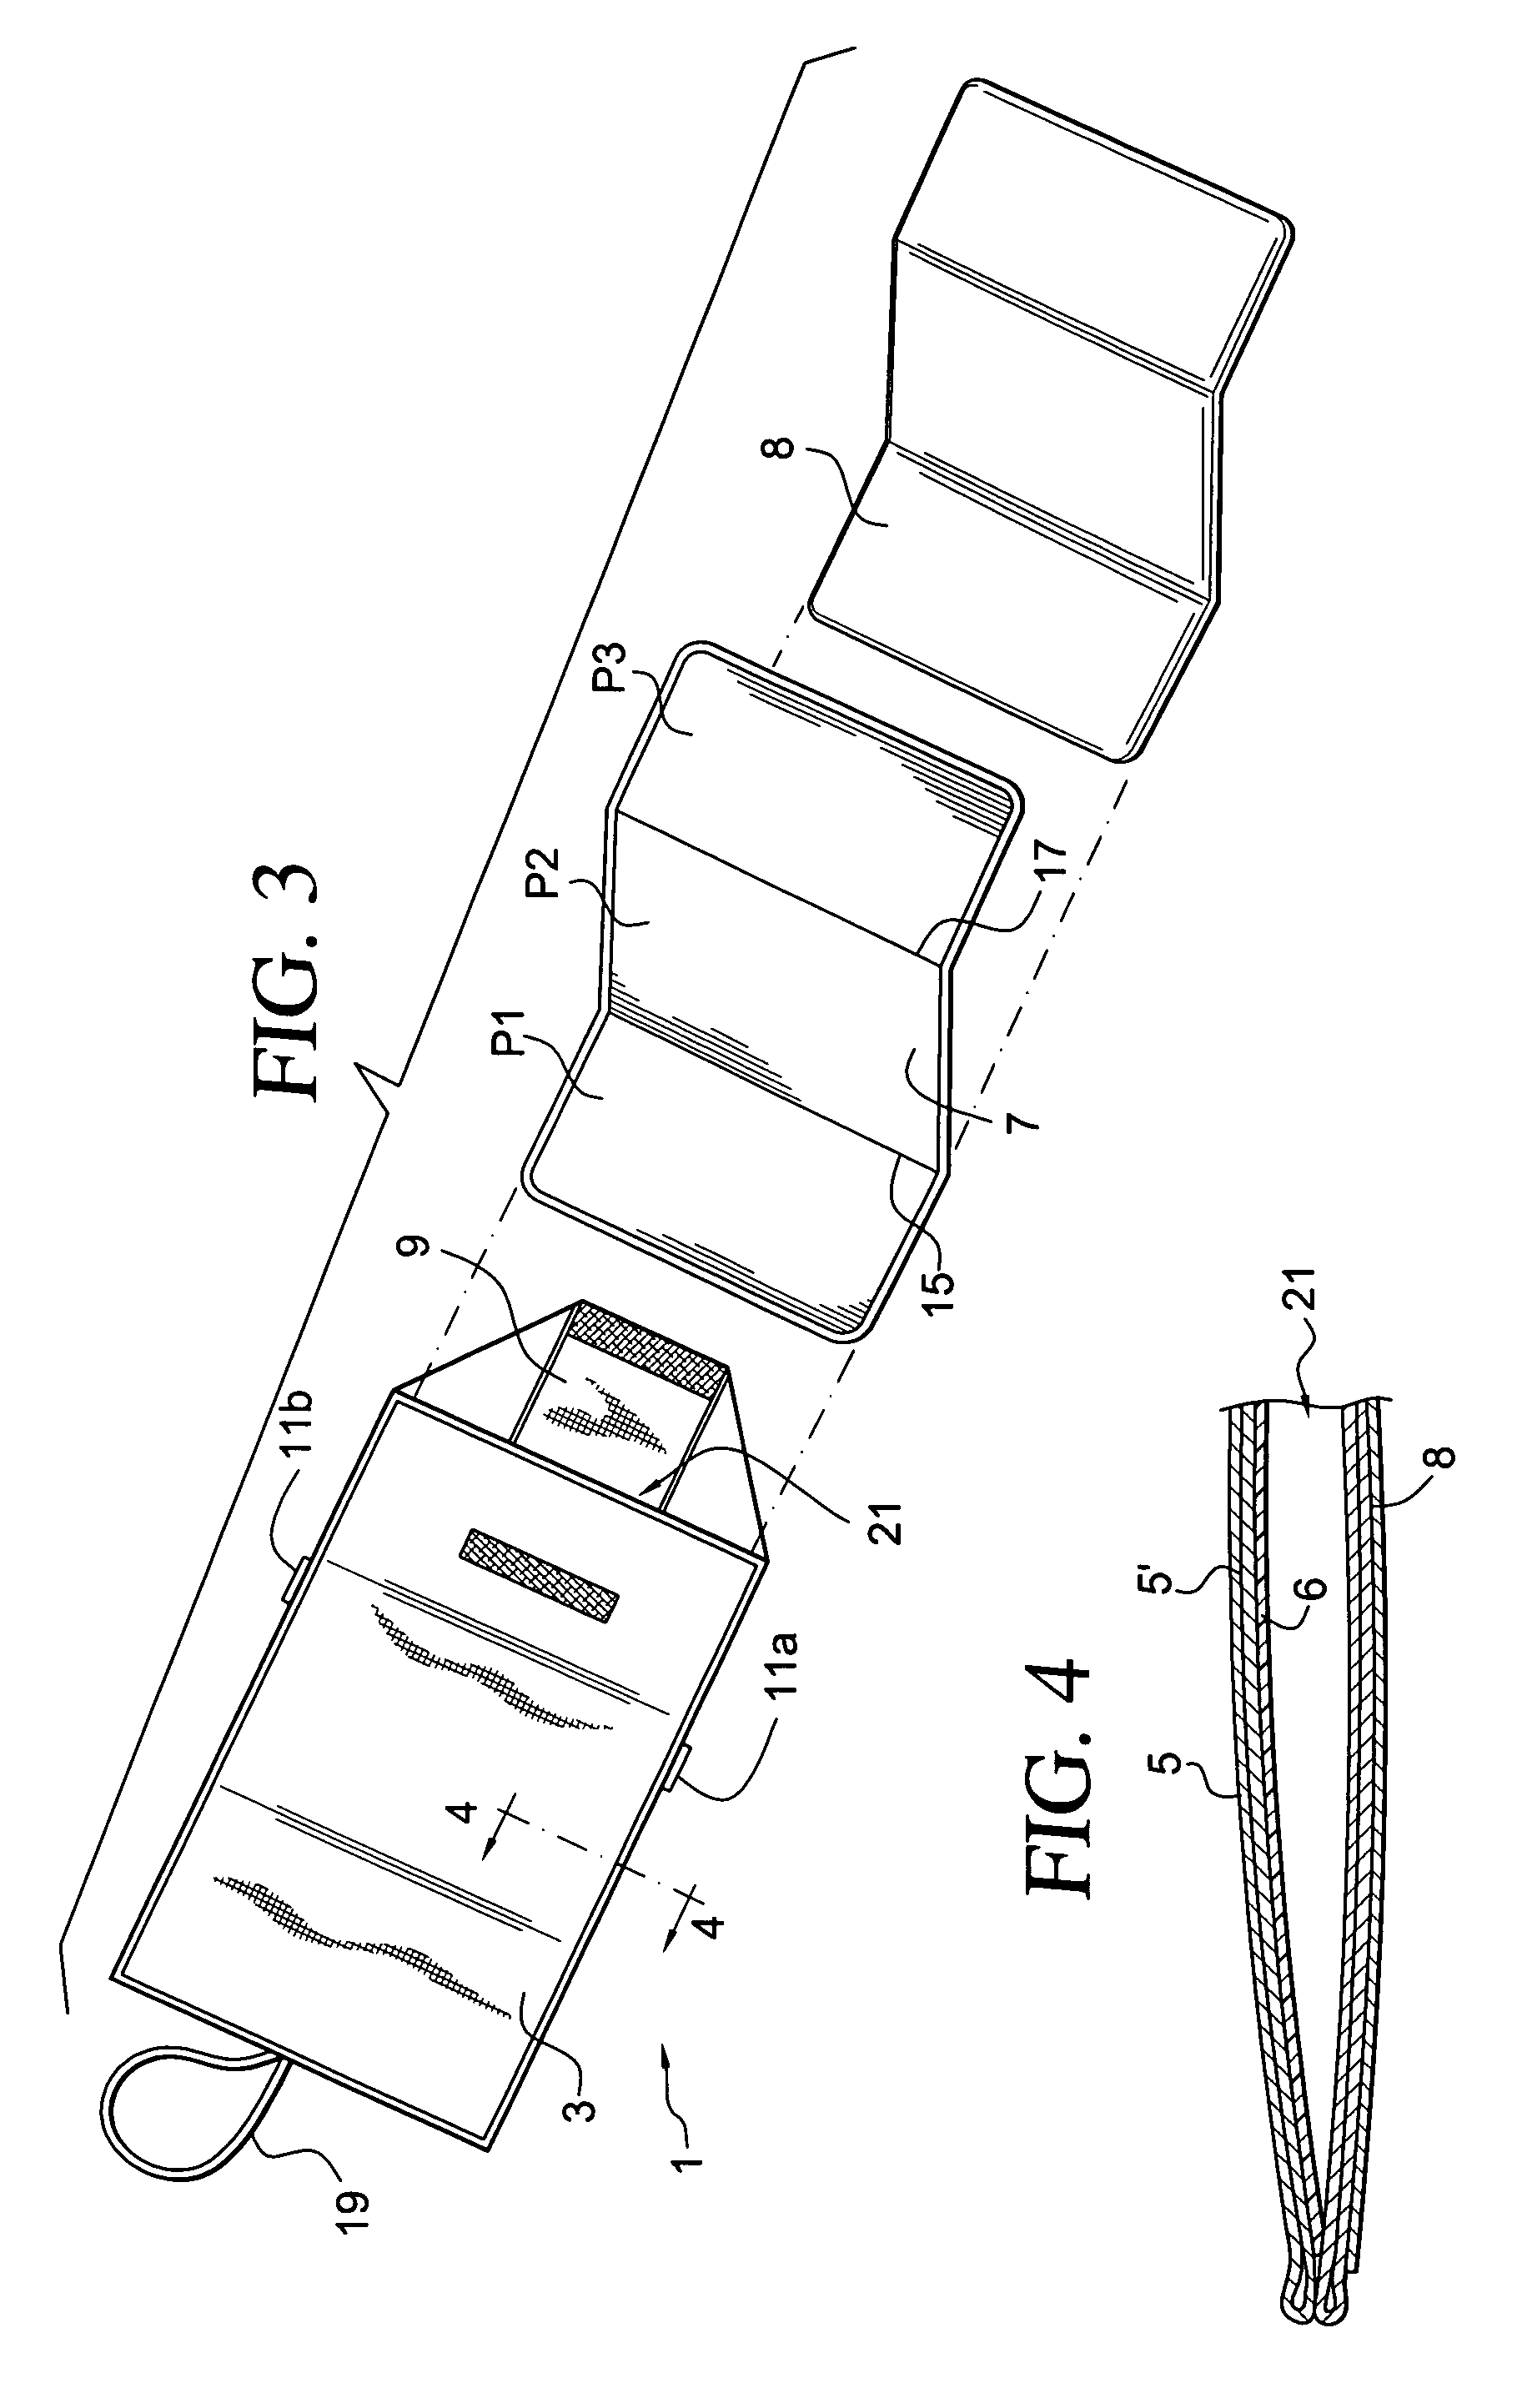 Infant restraining apparatus and soil barrier